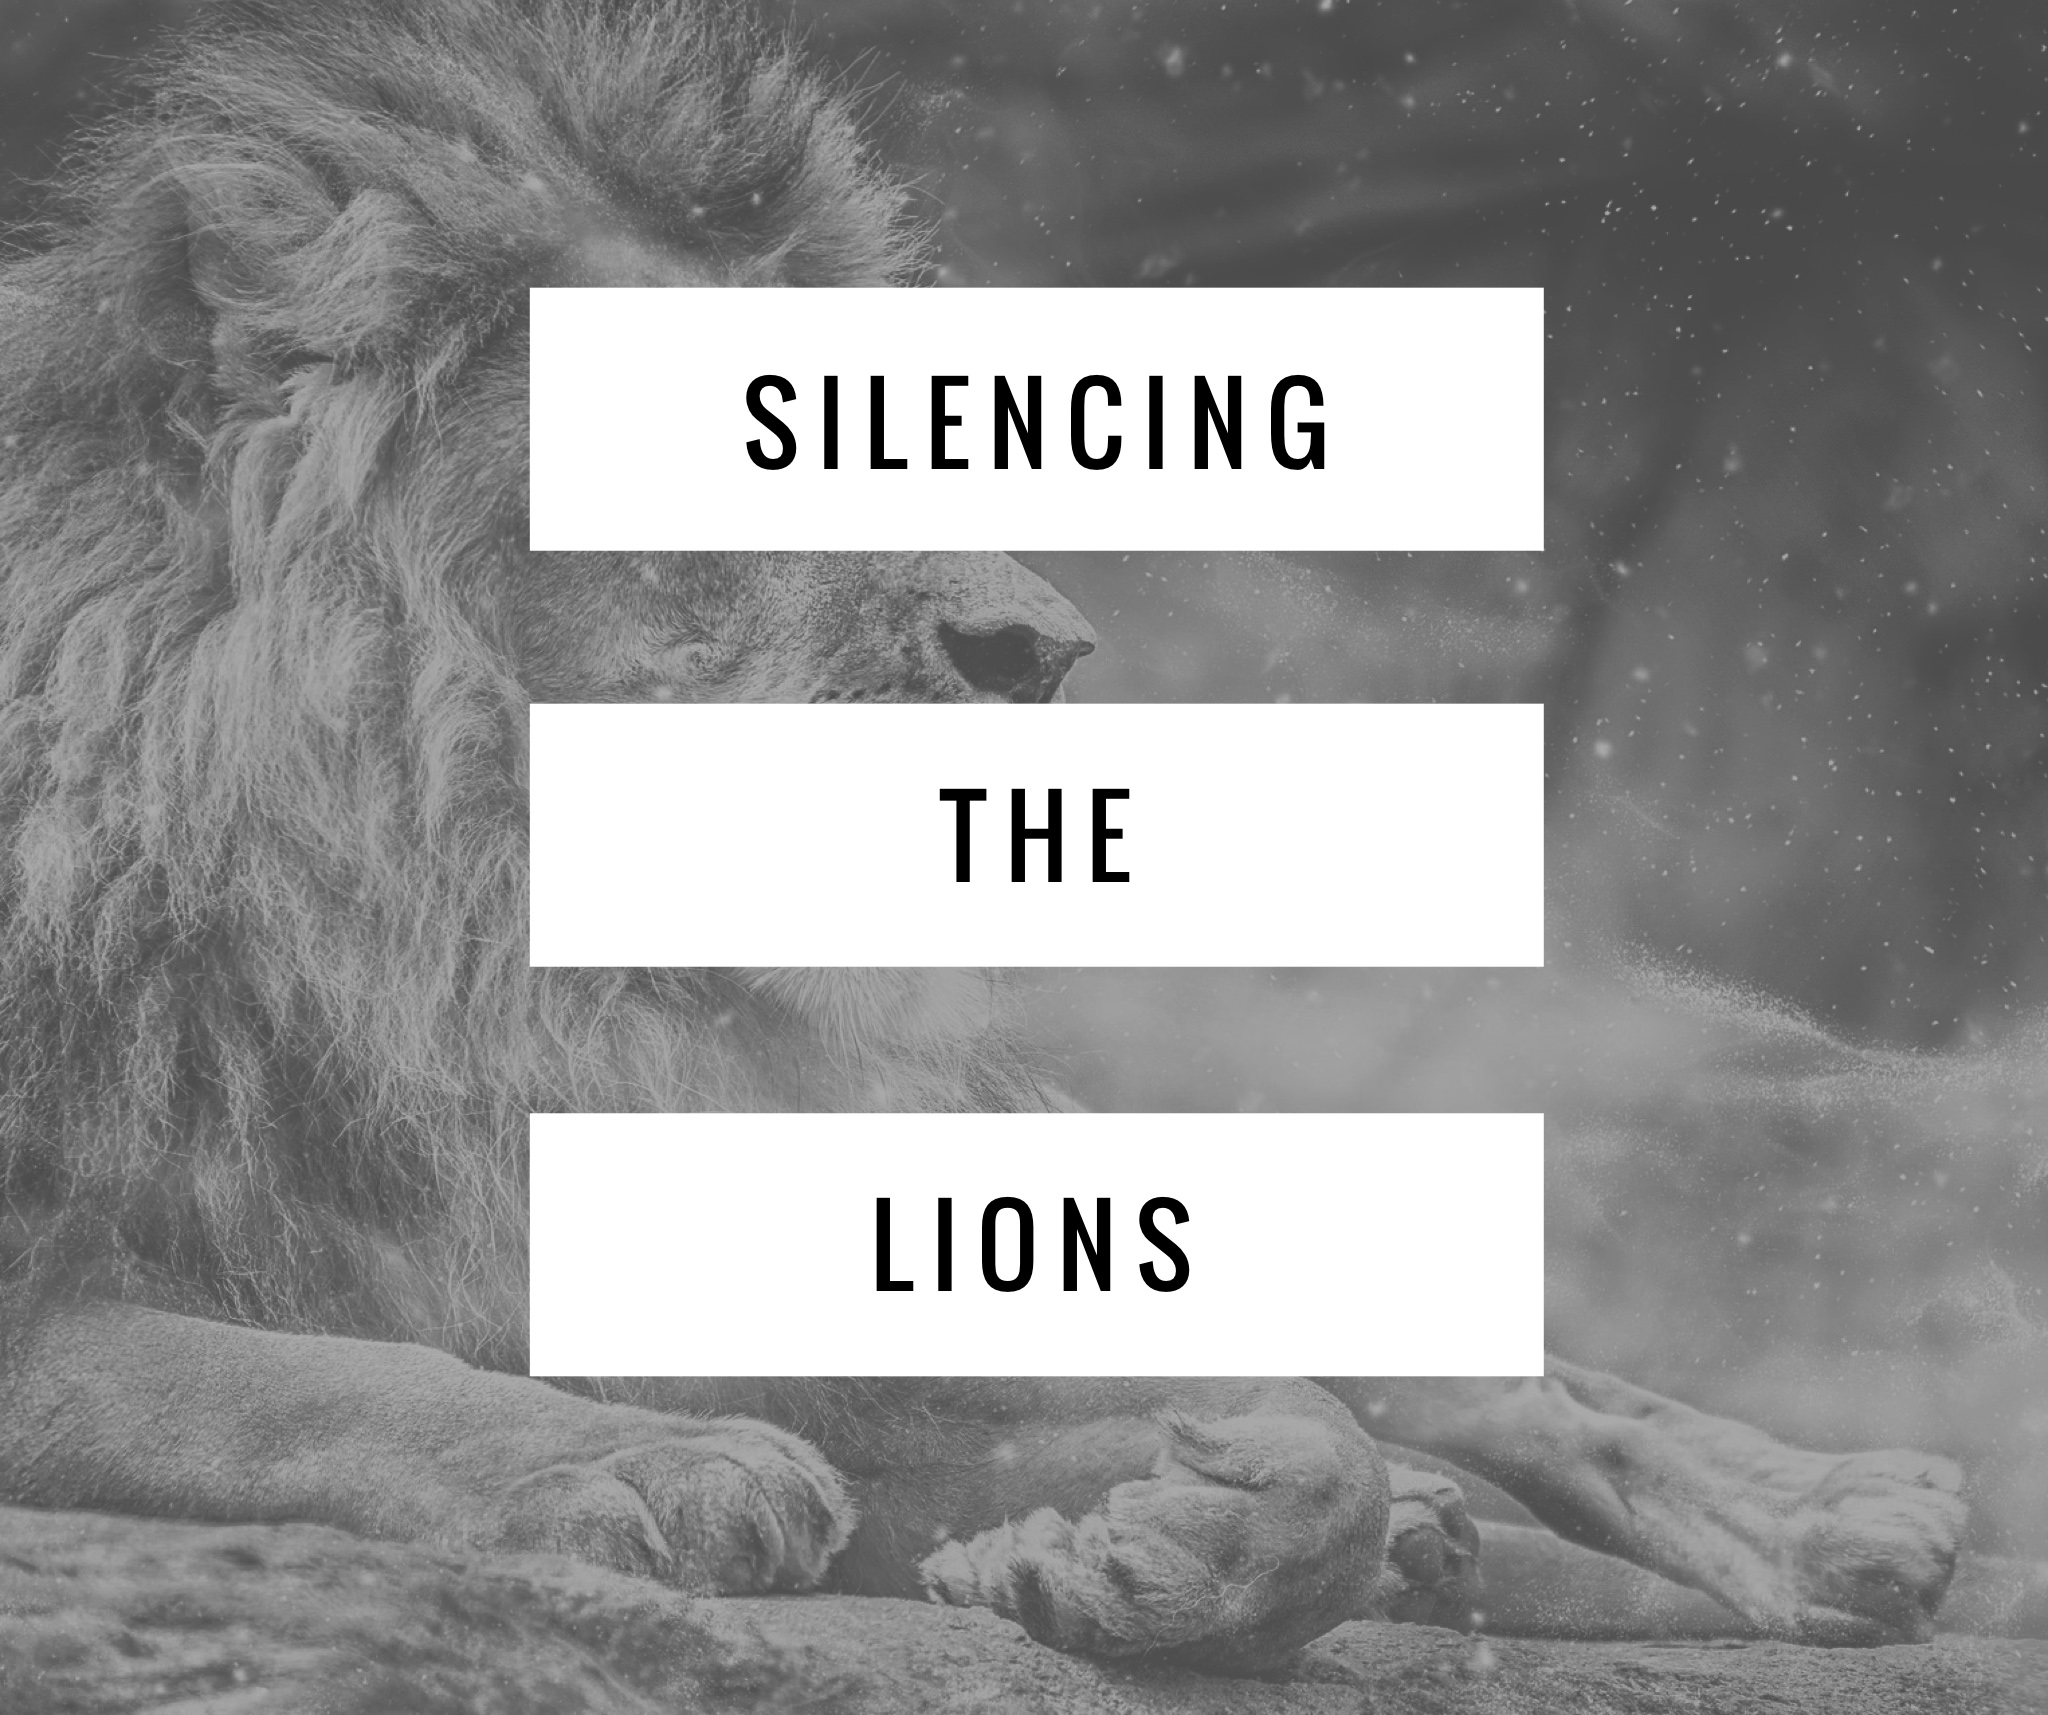 Silencing the Lions